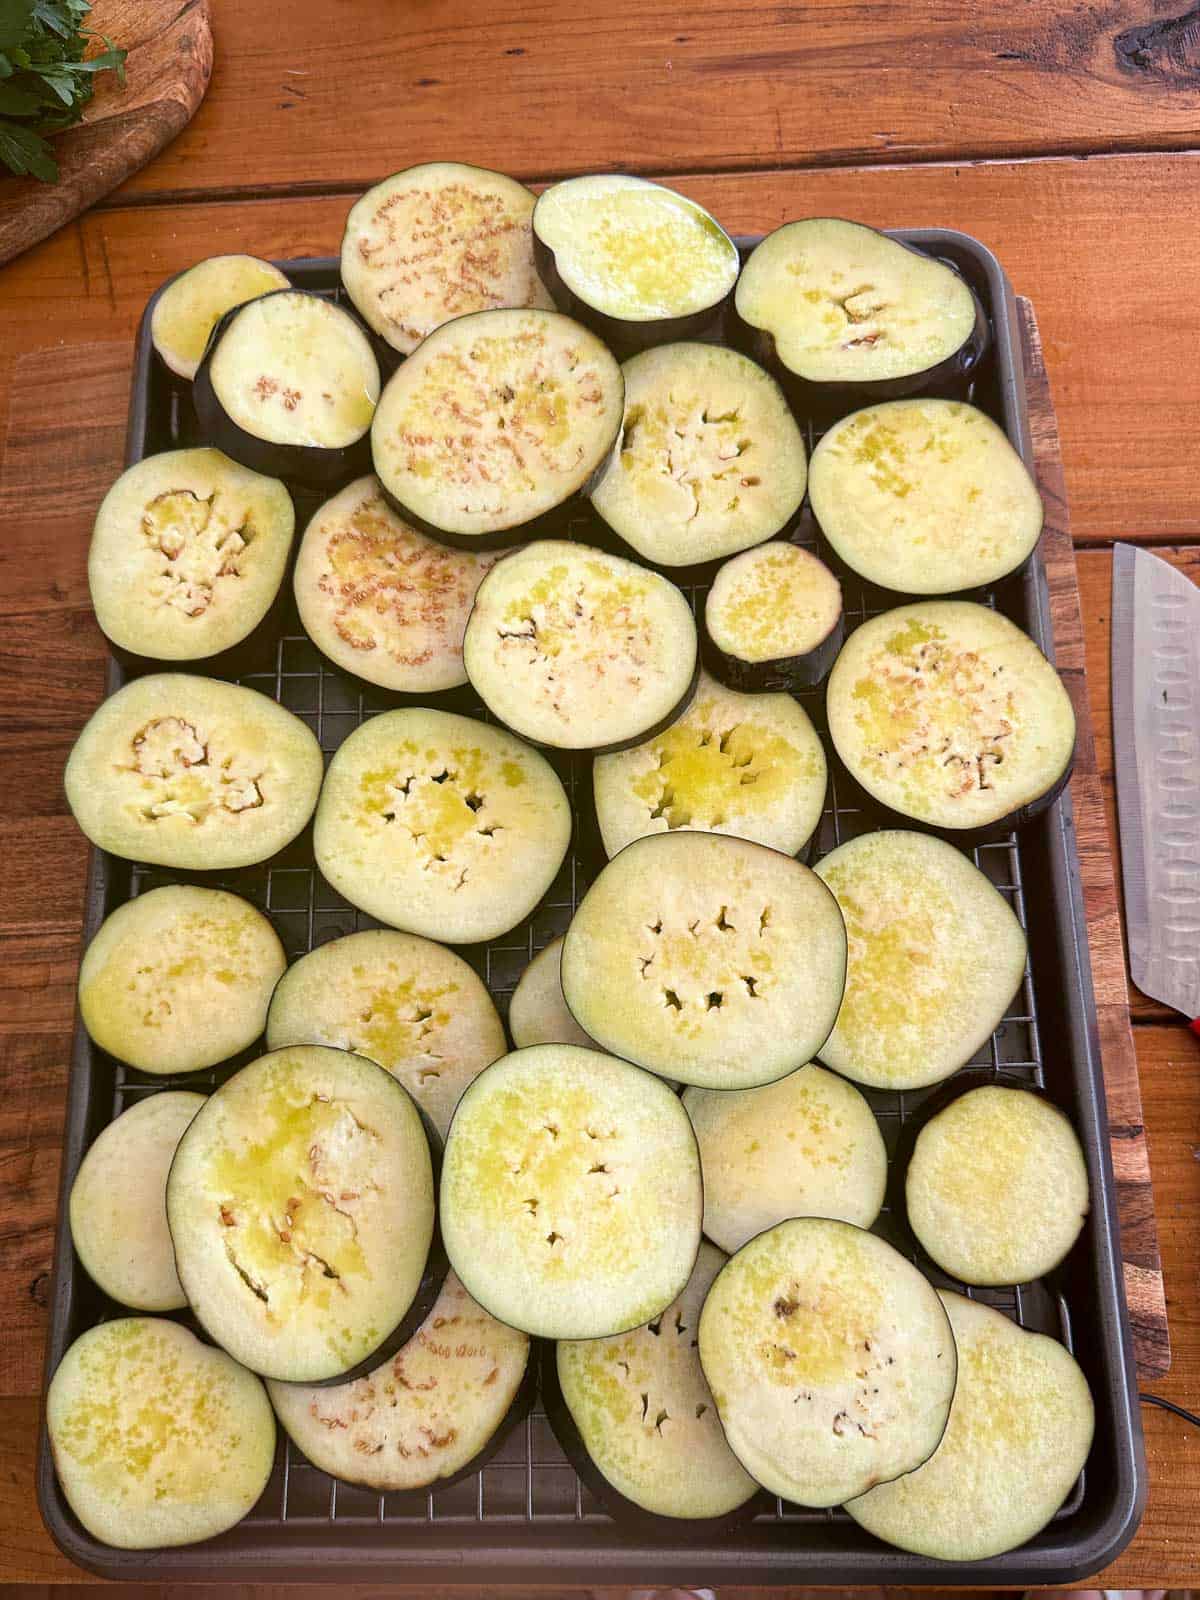 Brushed eggplant slices with olive oil on a tray, before grilling.